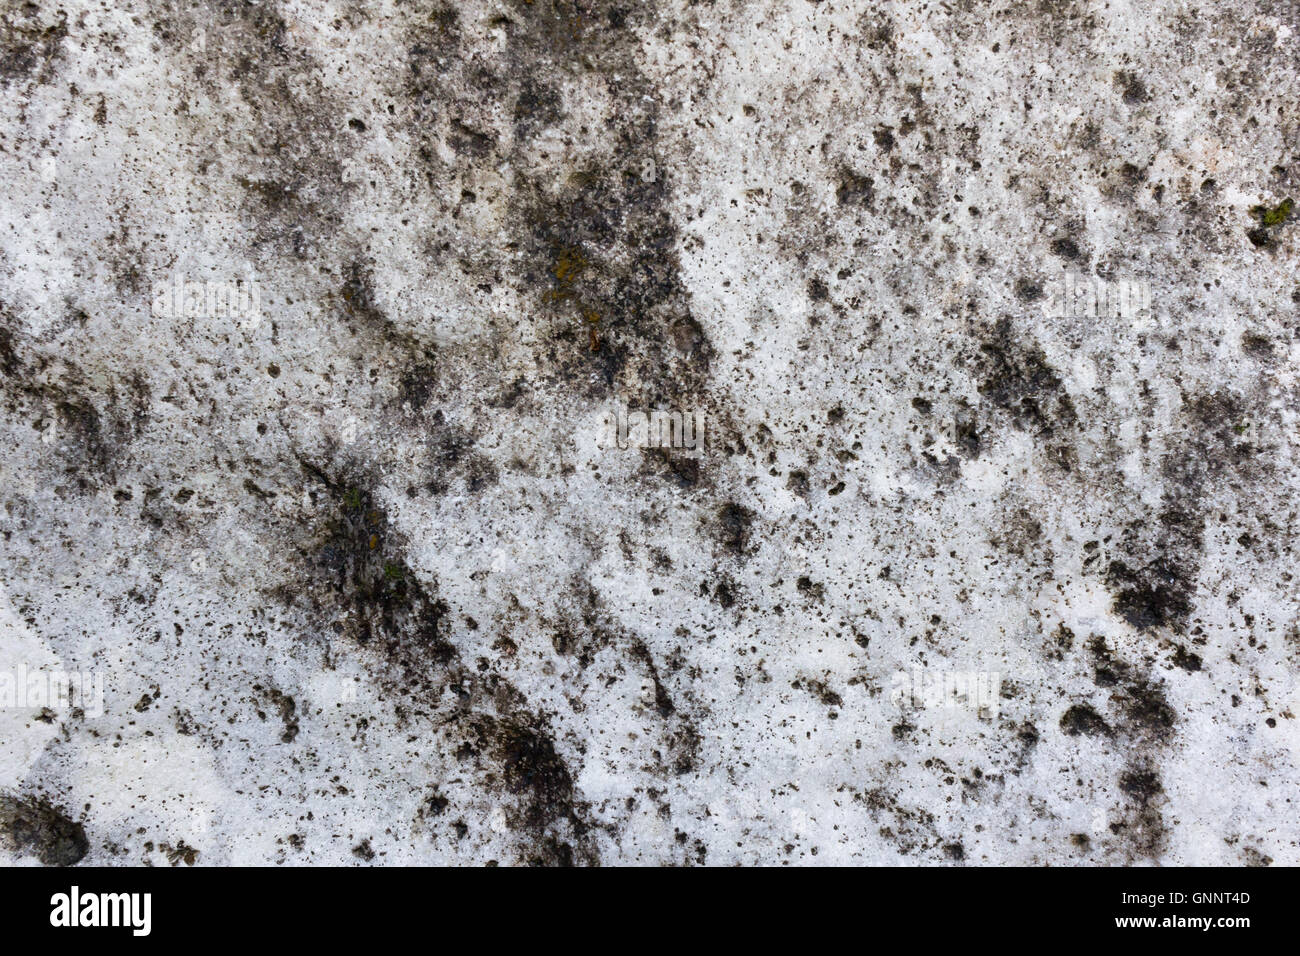 Stone similar to the lunar surface Stock Photo